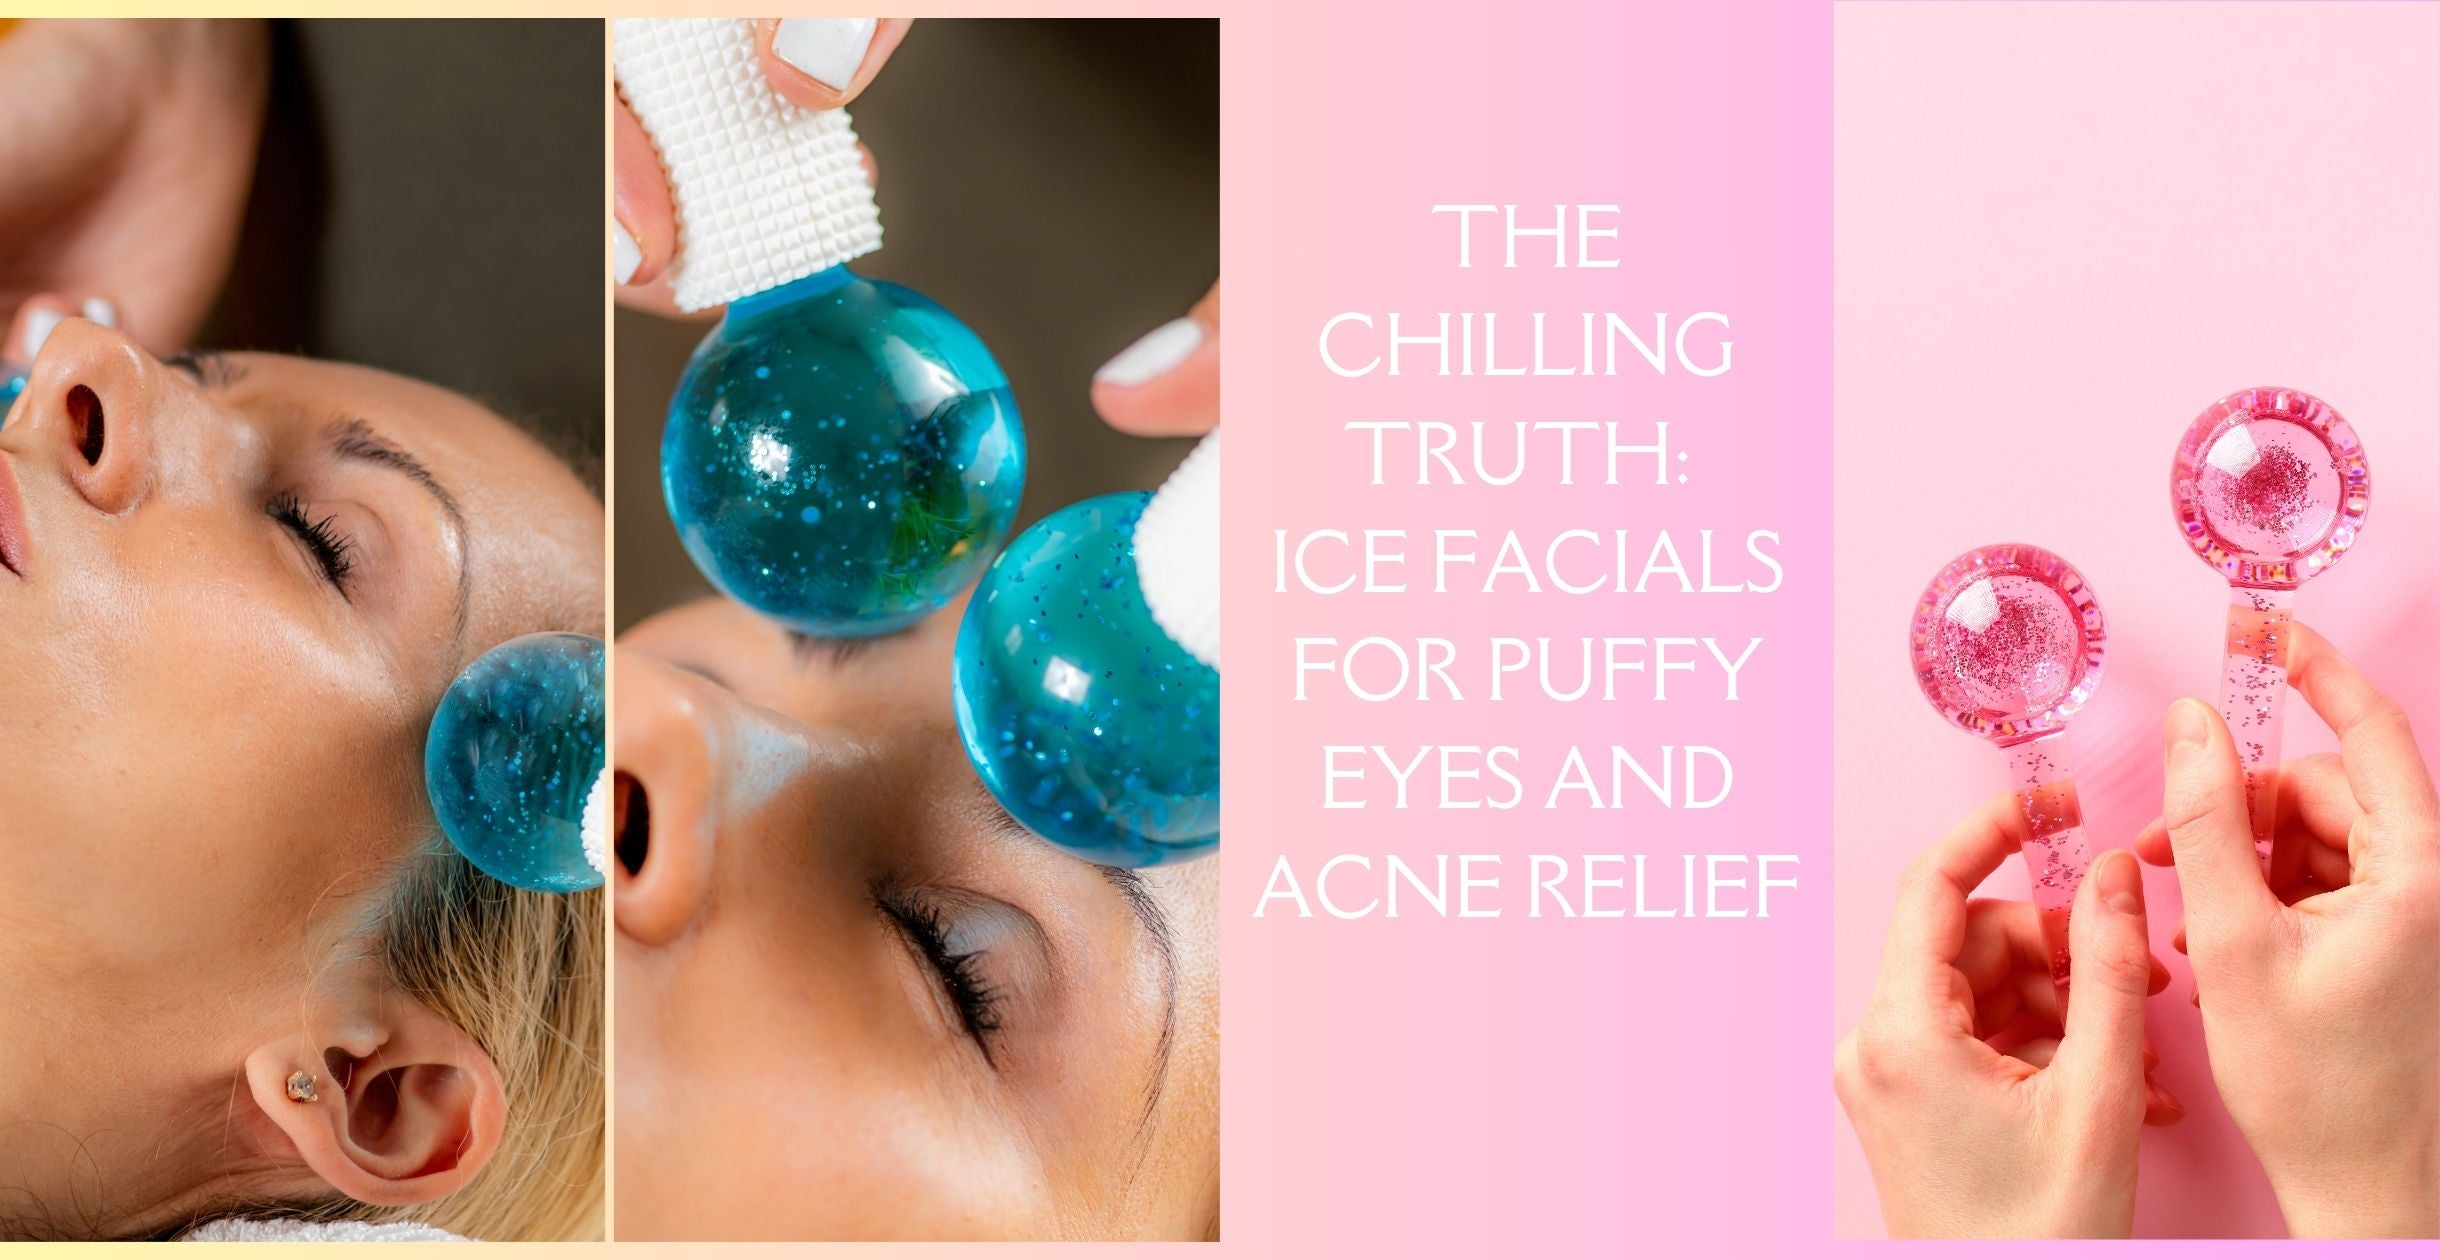 The Chilling Truth: Ice Facials for Puffy Eyes and Acne Relief